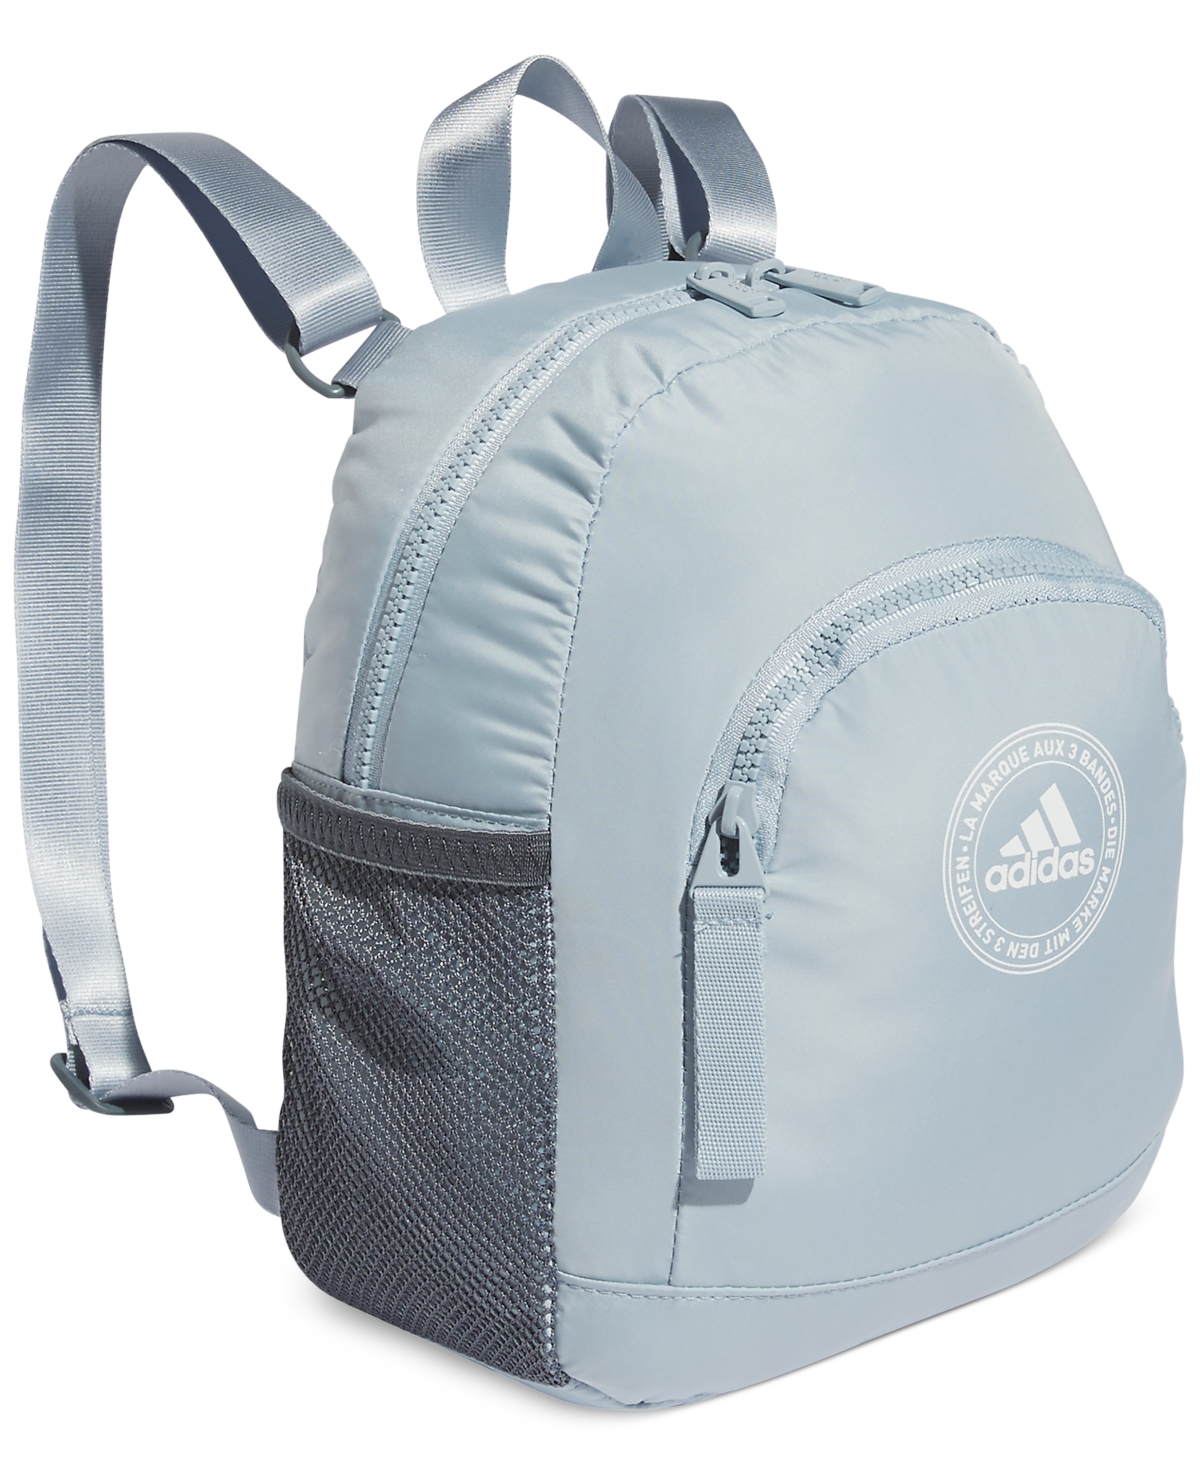 Adidas Originals Women's Linear 3 Mini Backpack In Light Pure Grey